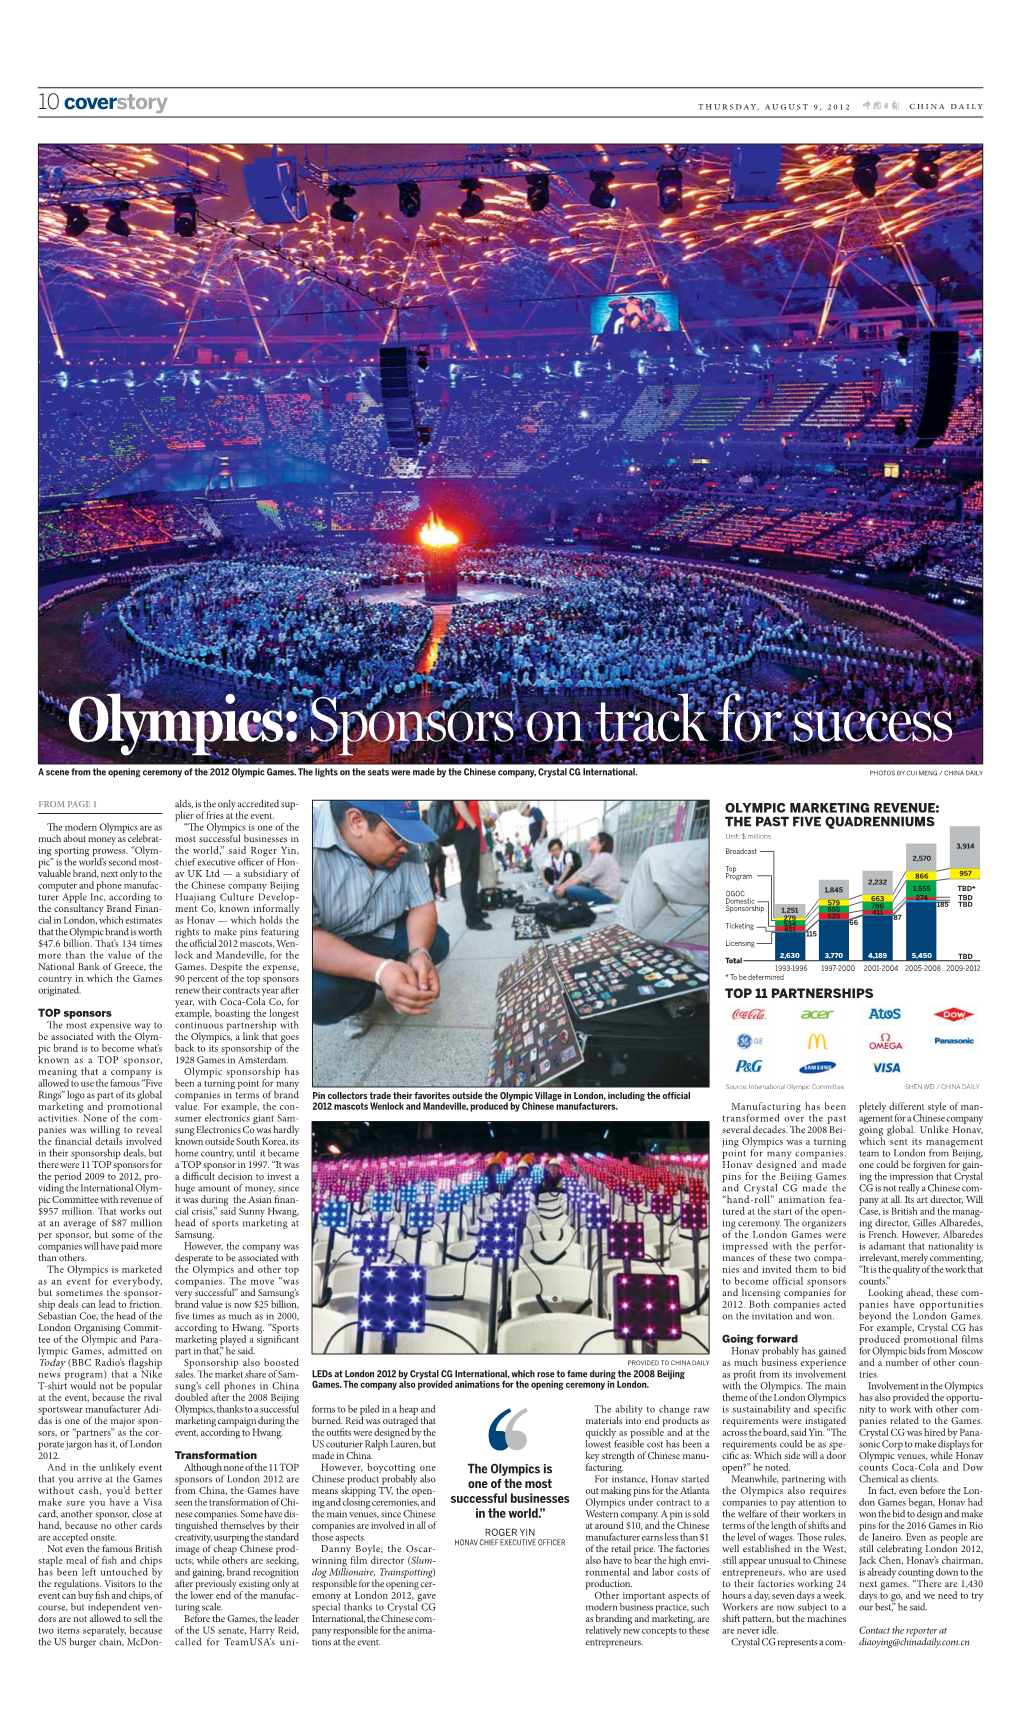 Olympics: Sponsors on Track for Success